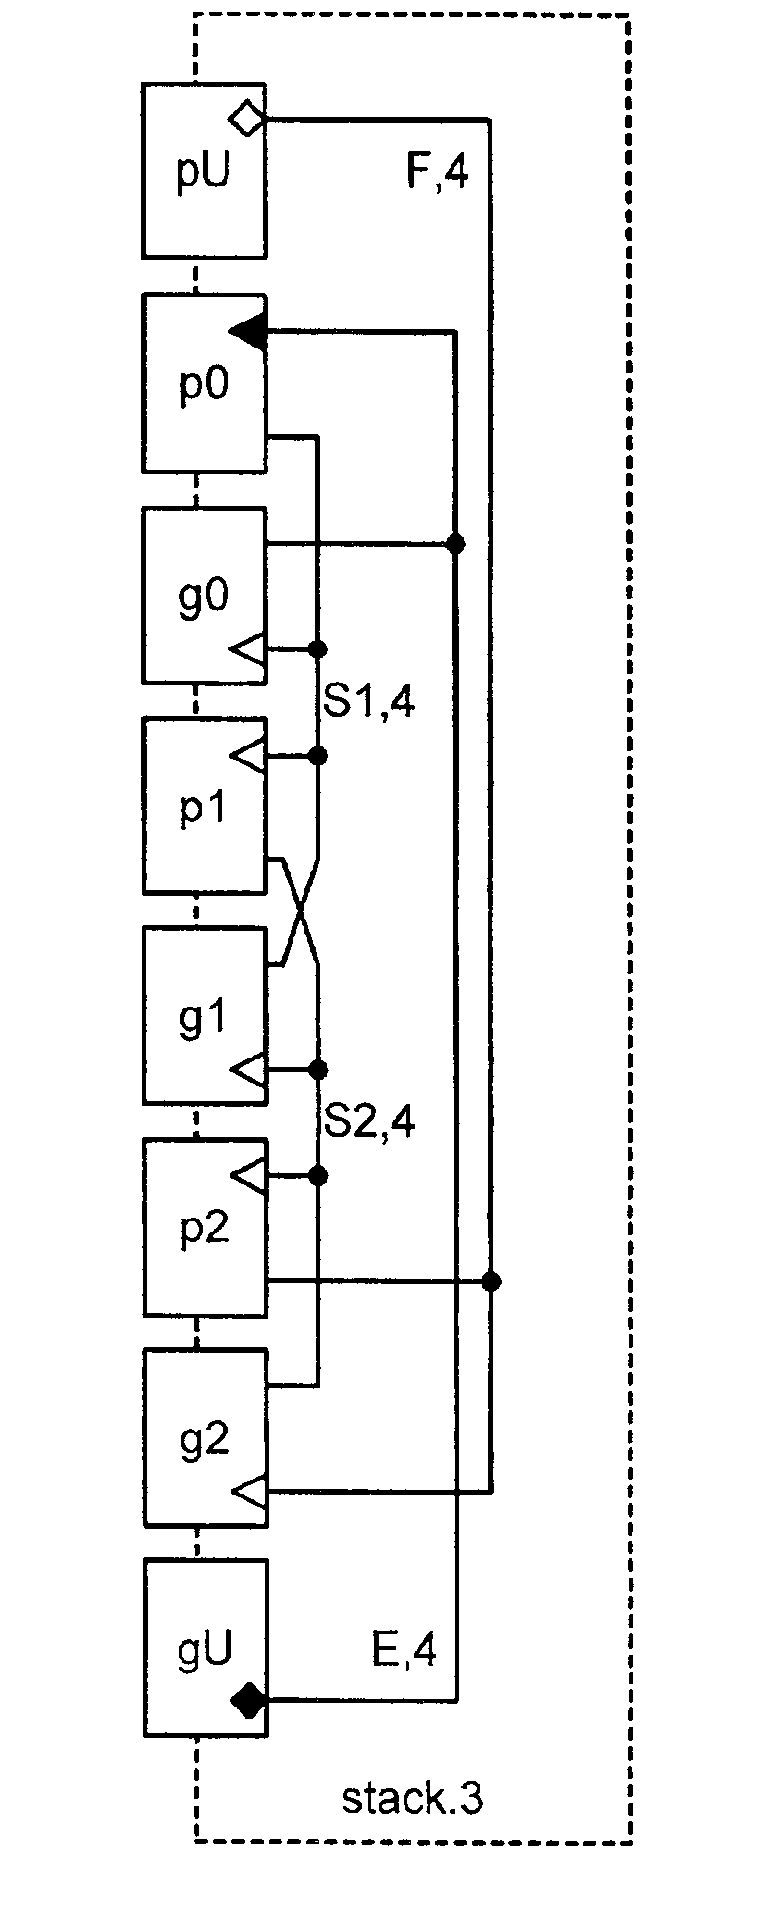 Method and apparatus for efficiently implementing a last-in first-out buffer